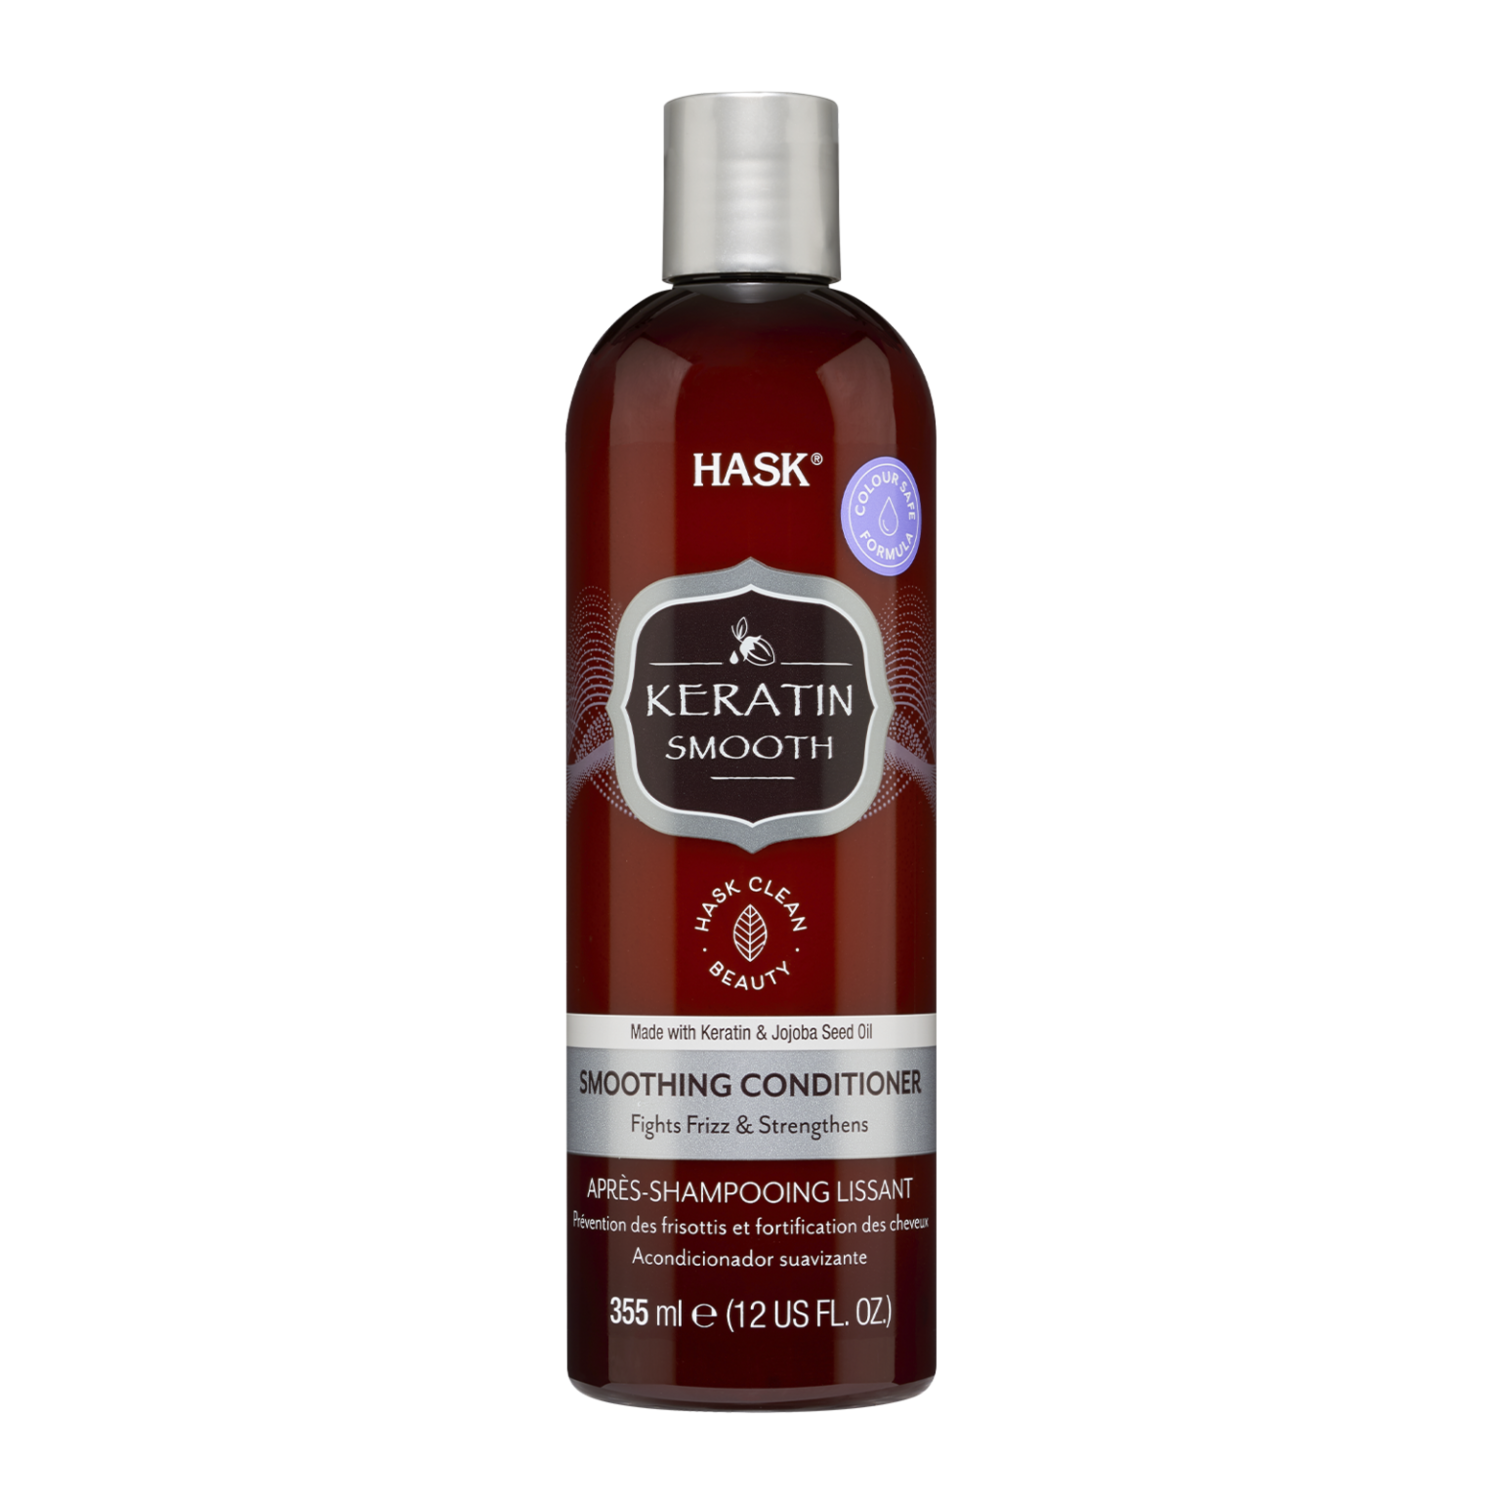 HASK KERATIN PROTEIN
SMOOTHING CONDITIONER